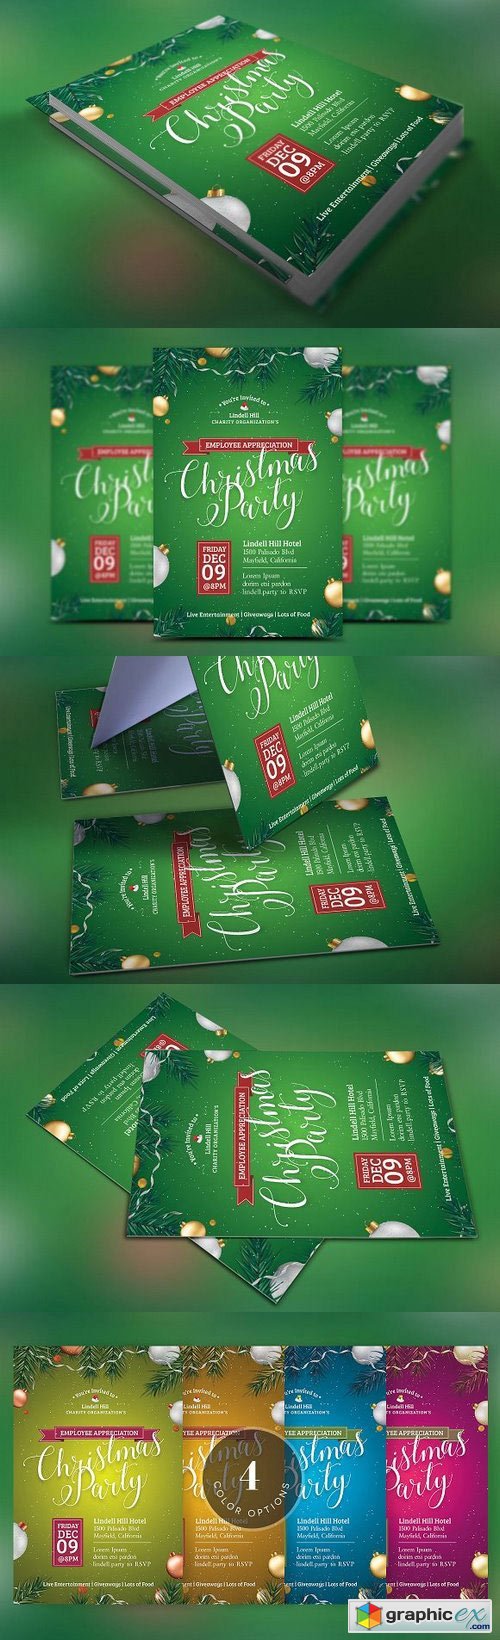 Green Christmas Party Flyer Template